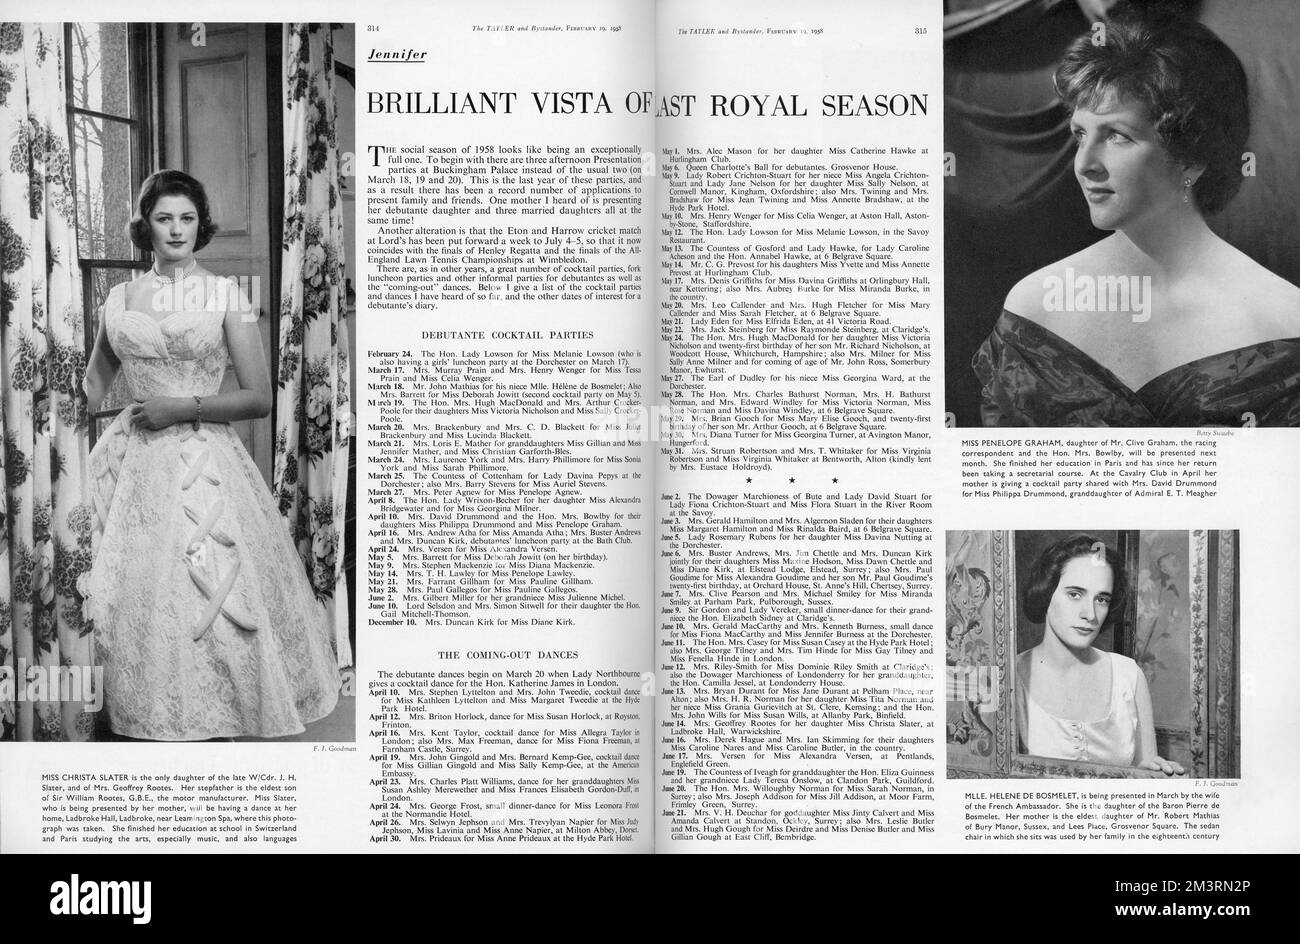 Brilliant vista of last Royal season.  Double page spread from The Tatler magazine listing some of the coming out dances and debutante cocktail parties for the 1958 London Season - significant in being the last year when debutantes were presented at court.  Also featured are three debs of that year, Miss Christa Slater, Miss Penelope Graham and Mlle. Helene de Bosmelet.  1958 Stock Photo